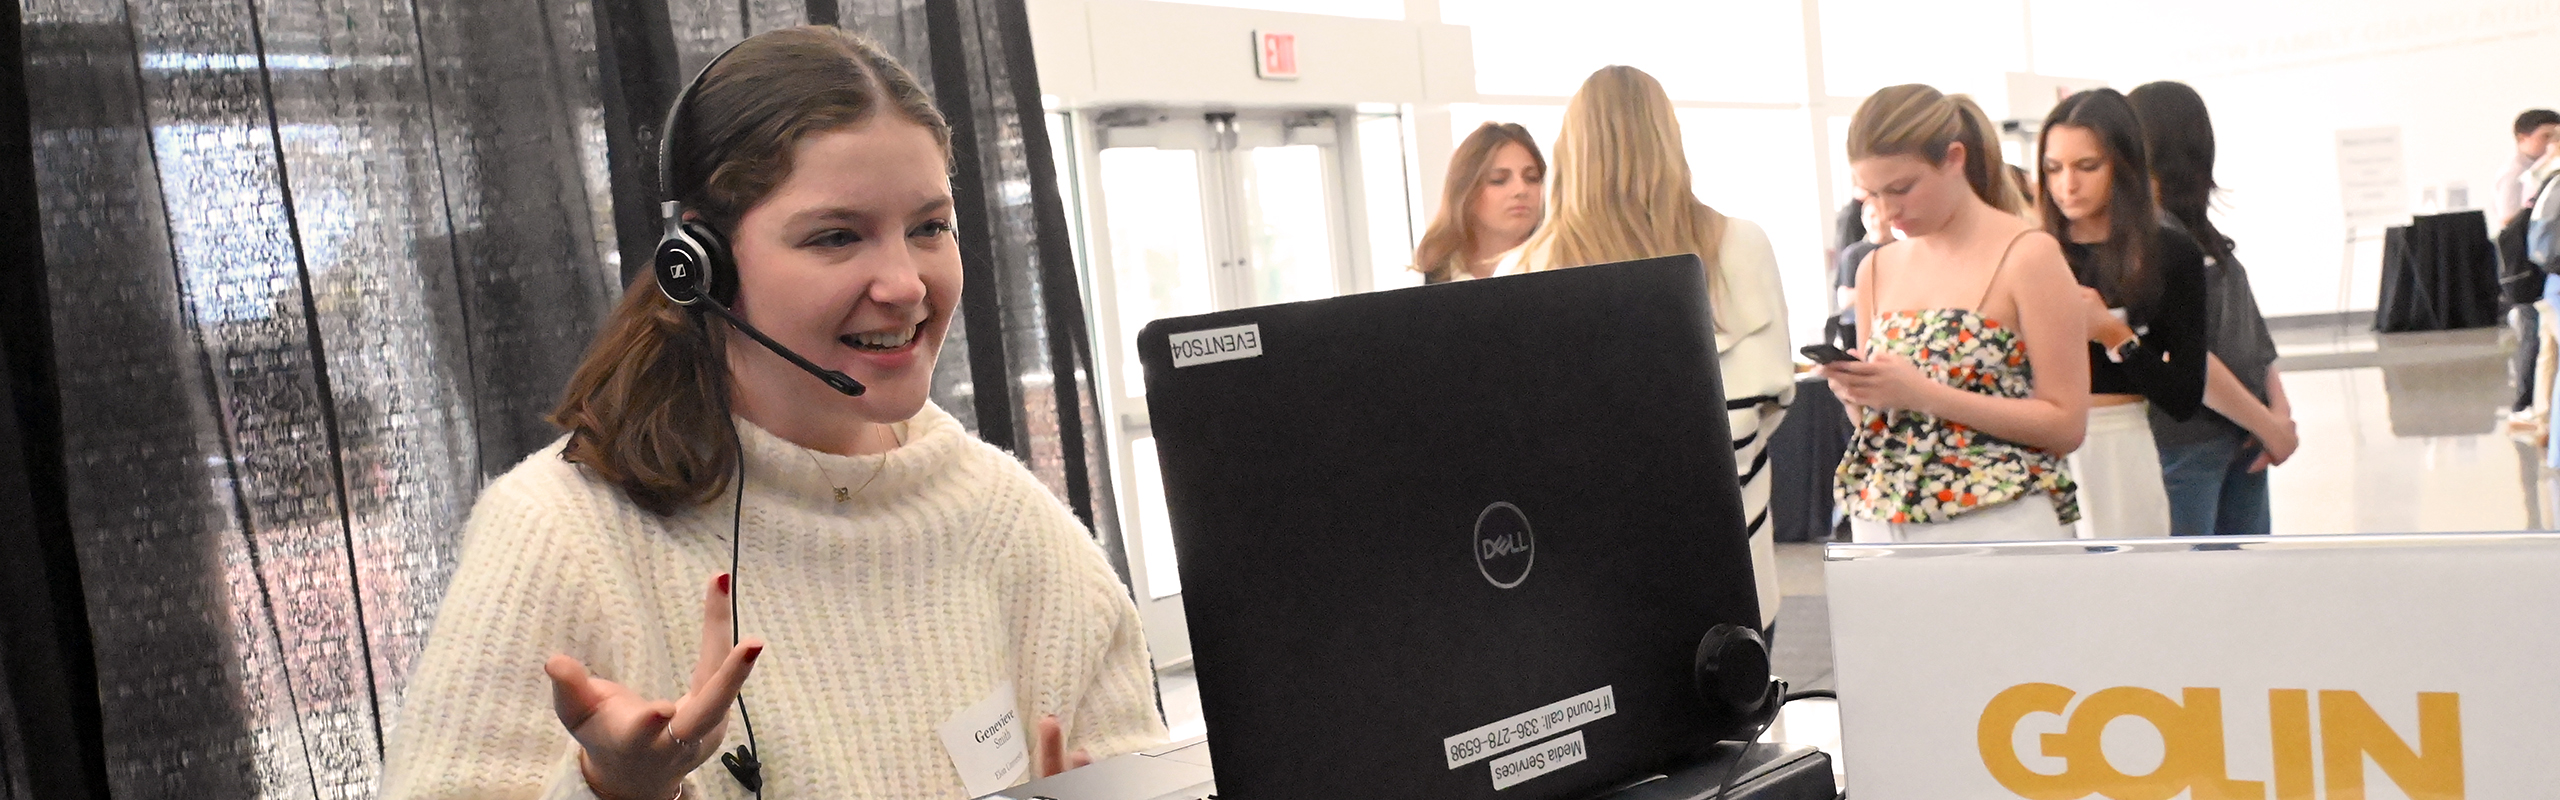 A strategic communications major interested in public relations jobs speaks virtually with an employer at an Elon University career fair and job expo.